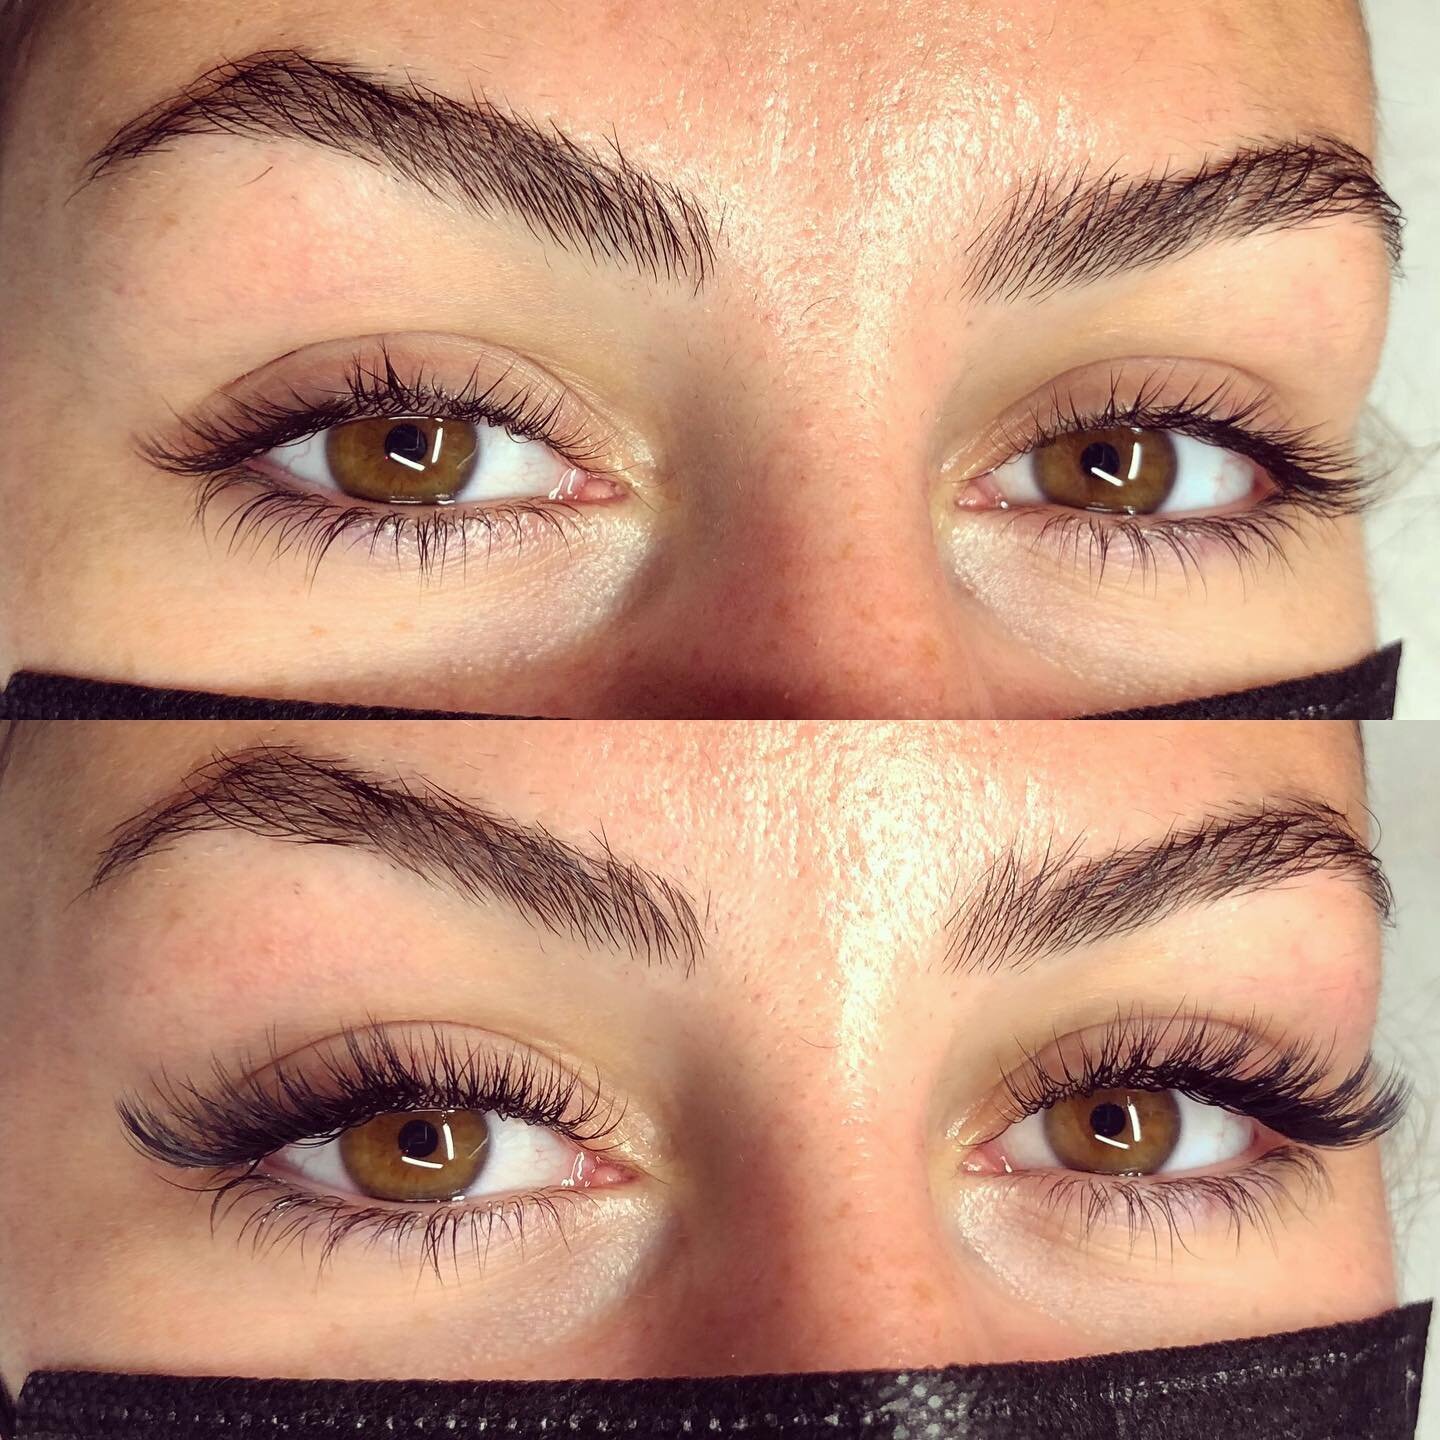 C curl classics are my favourite atm 😍

#CCurl #ClassicLashes #LashArtist #LondonLashes #LashBase #LashedWithLove  #claphamlashes